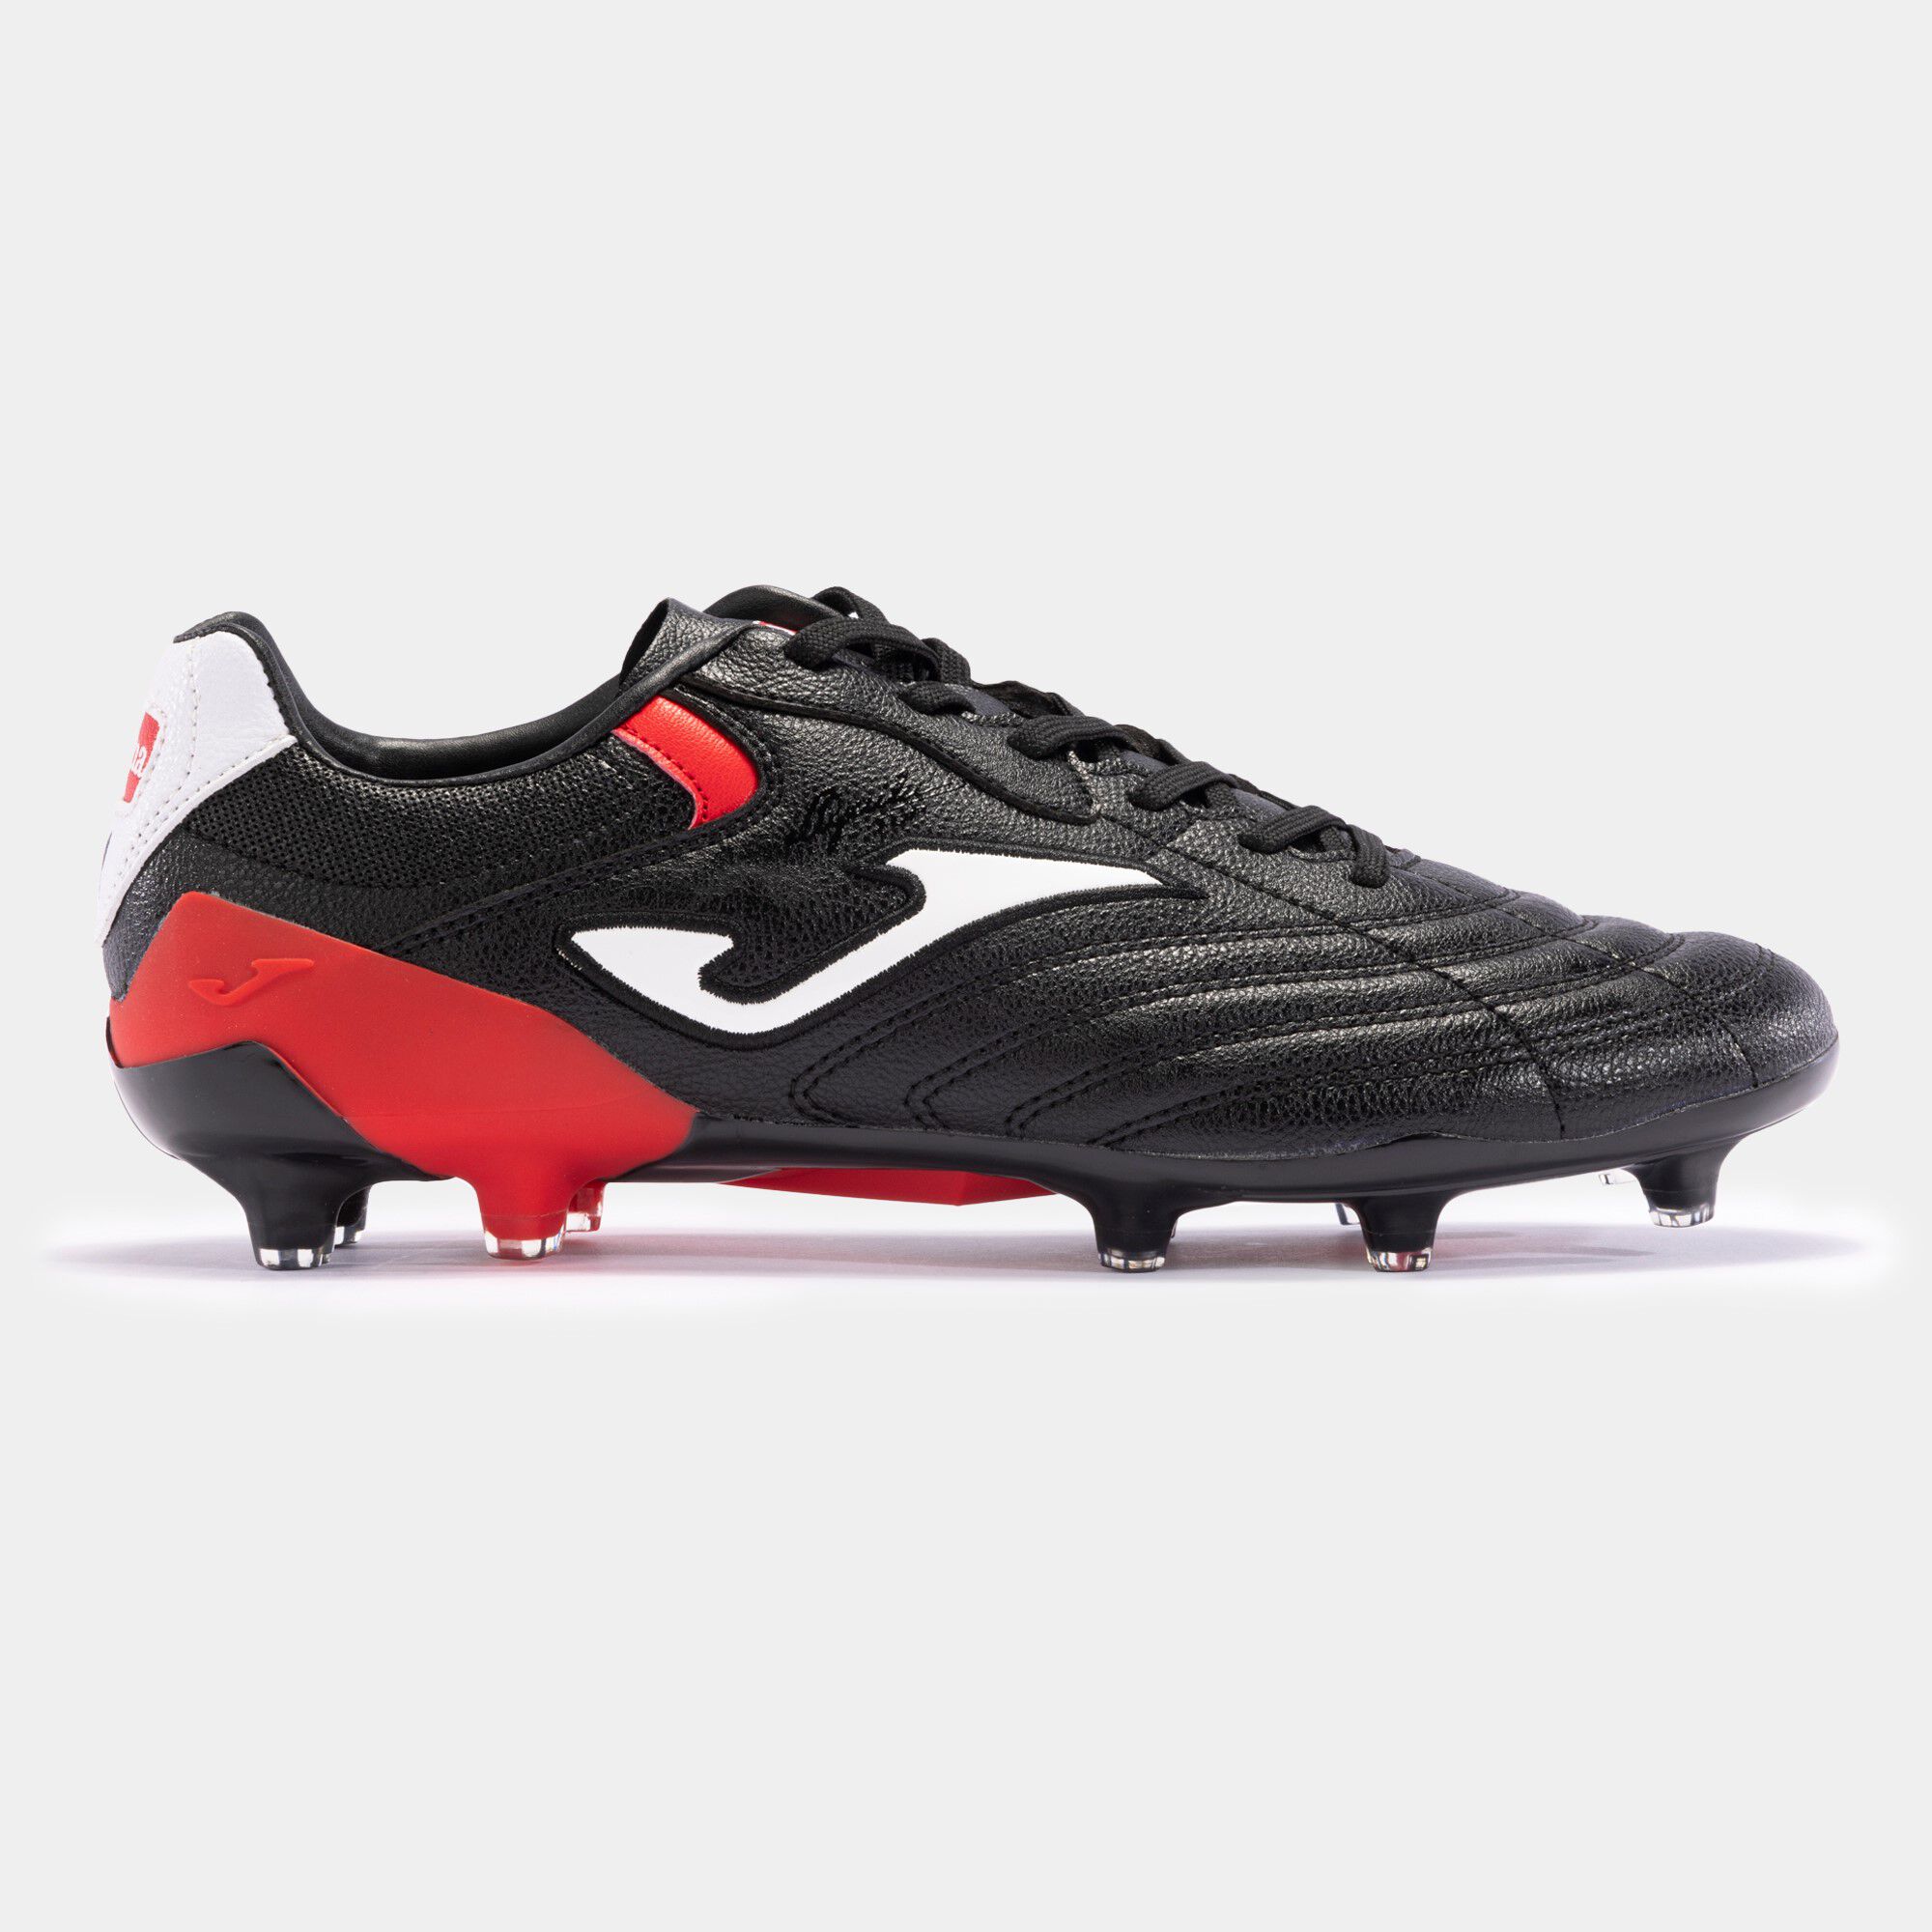 Football boots Aguila Cup 23 firm ground FG black red